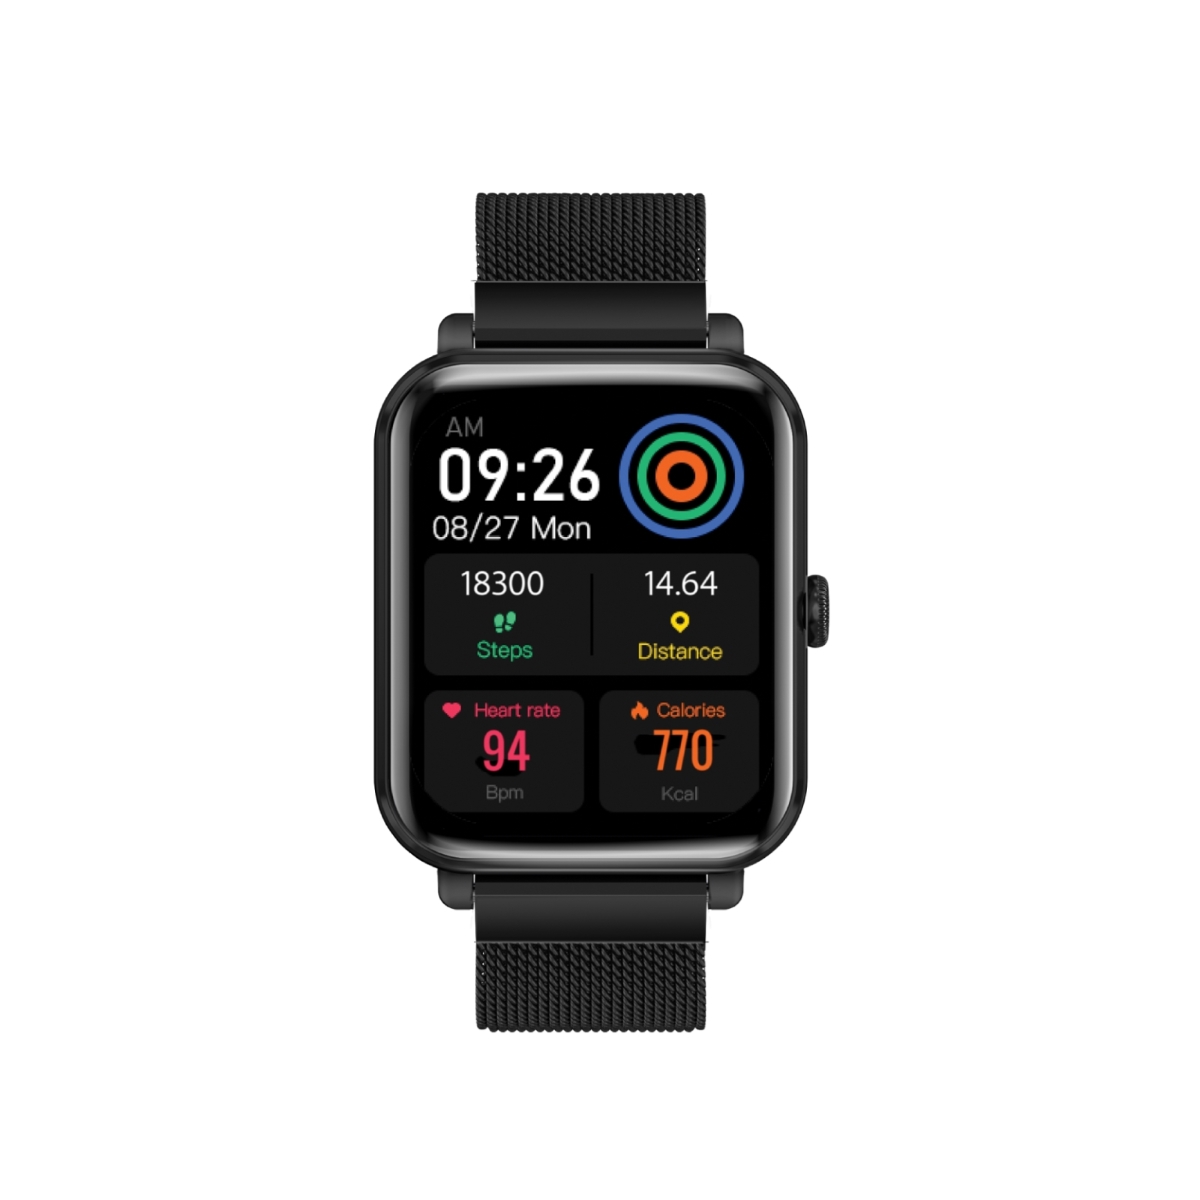 Promate Smart Watch, Bluetooth 5.3 Health and Fitness Tracker with Media Storage, 1.78” AMOLED Display, 20 Day Battery Life, 37 Sports Modes and IP68 Water Resistance for iPhone 14, Galaxy S22, ProWatch-M18.Black